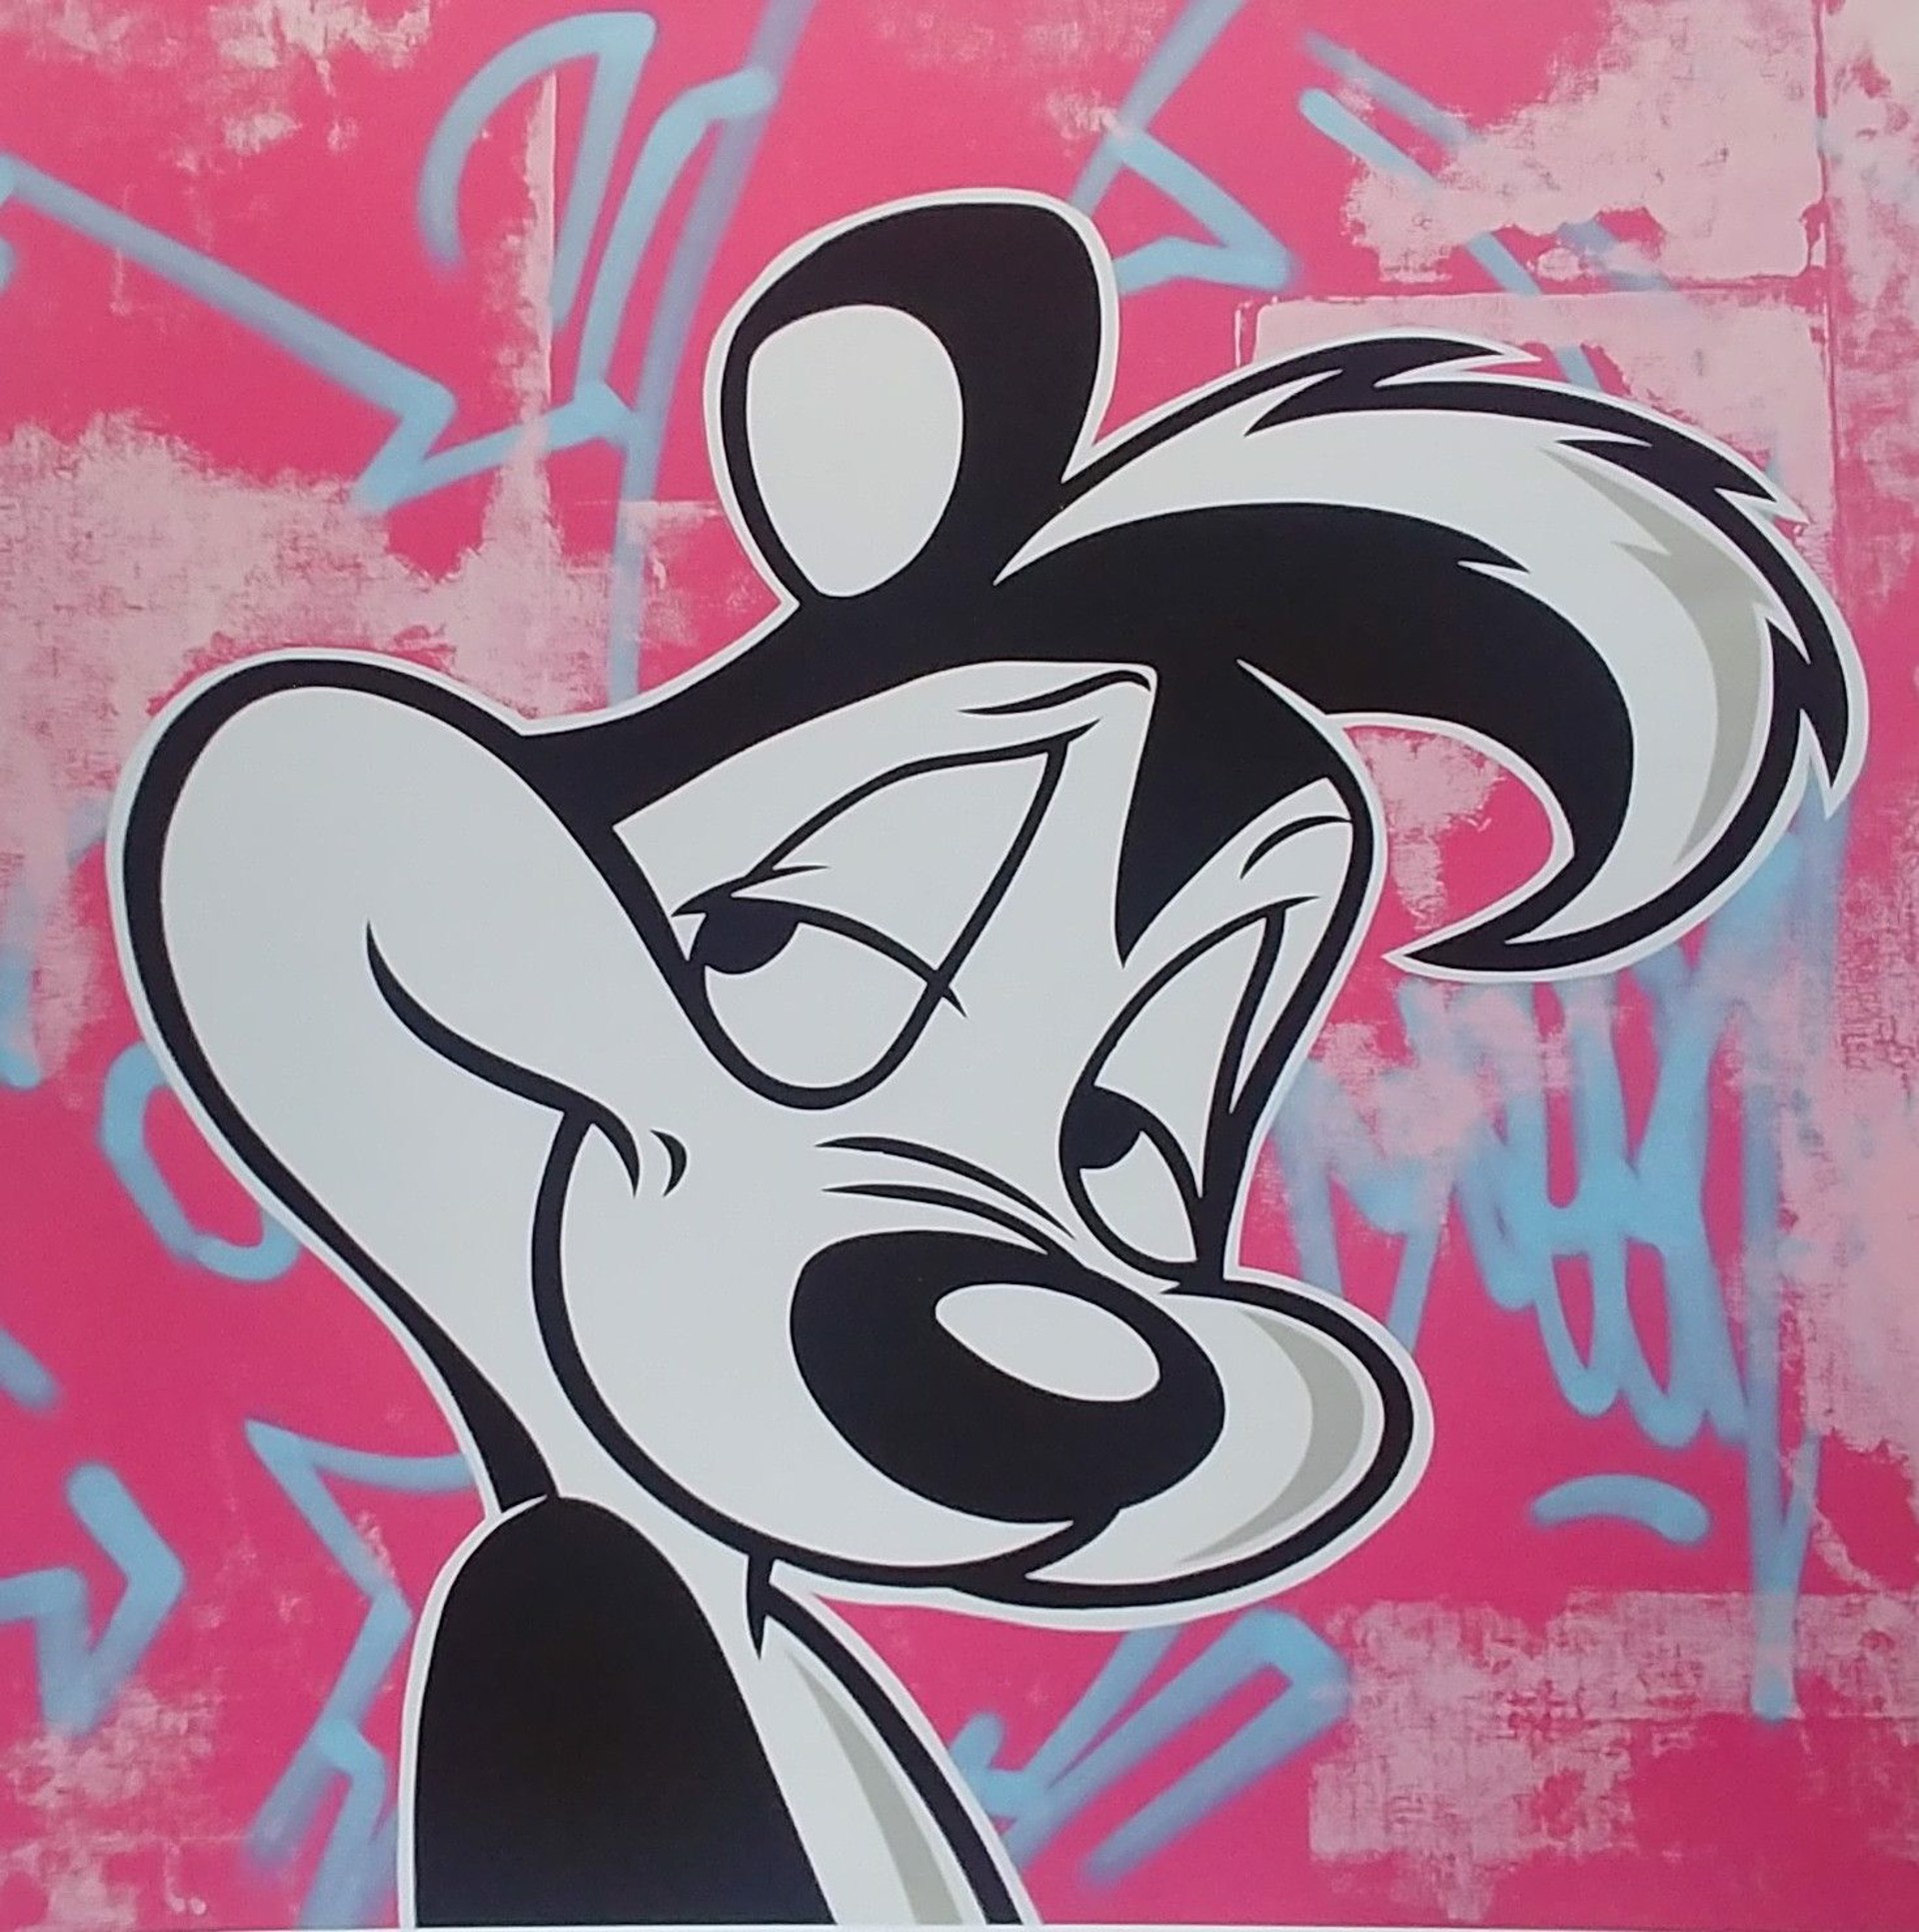 Pepe Le Pew (3/25) by Seen